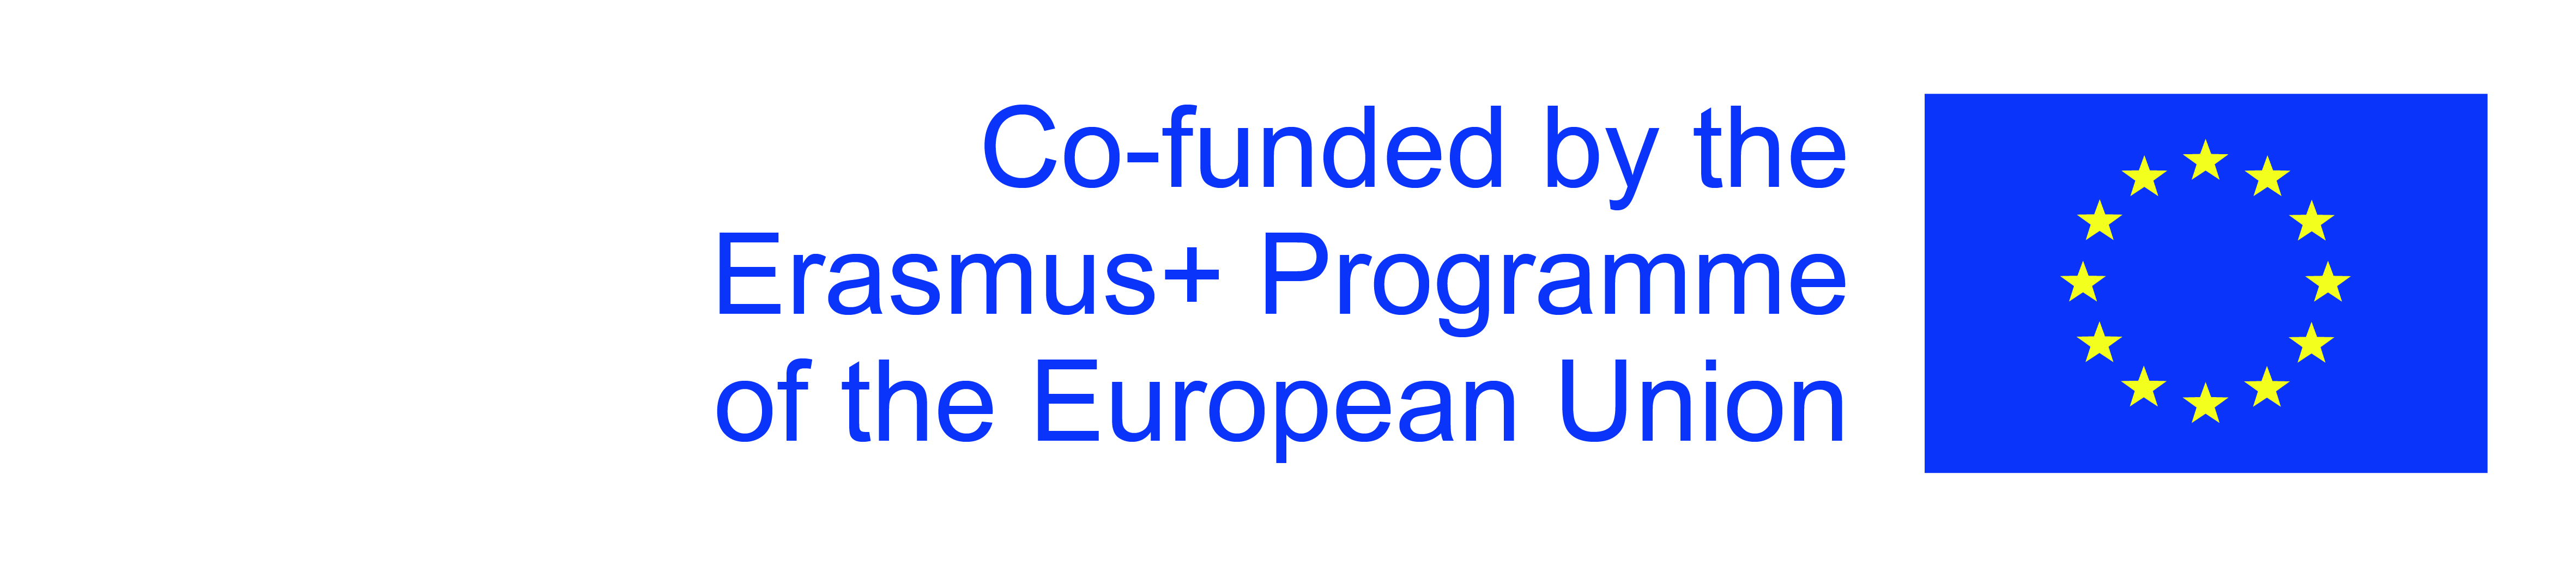 Co-funded by Erasmus+